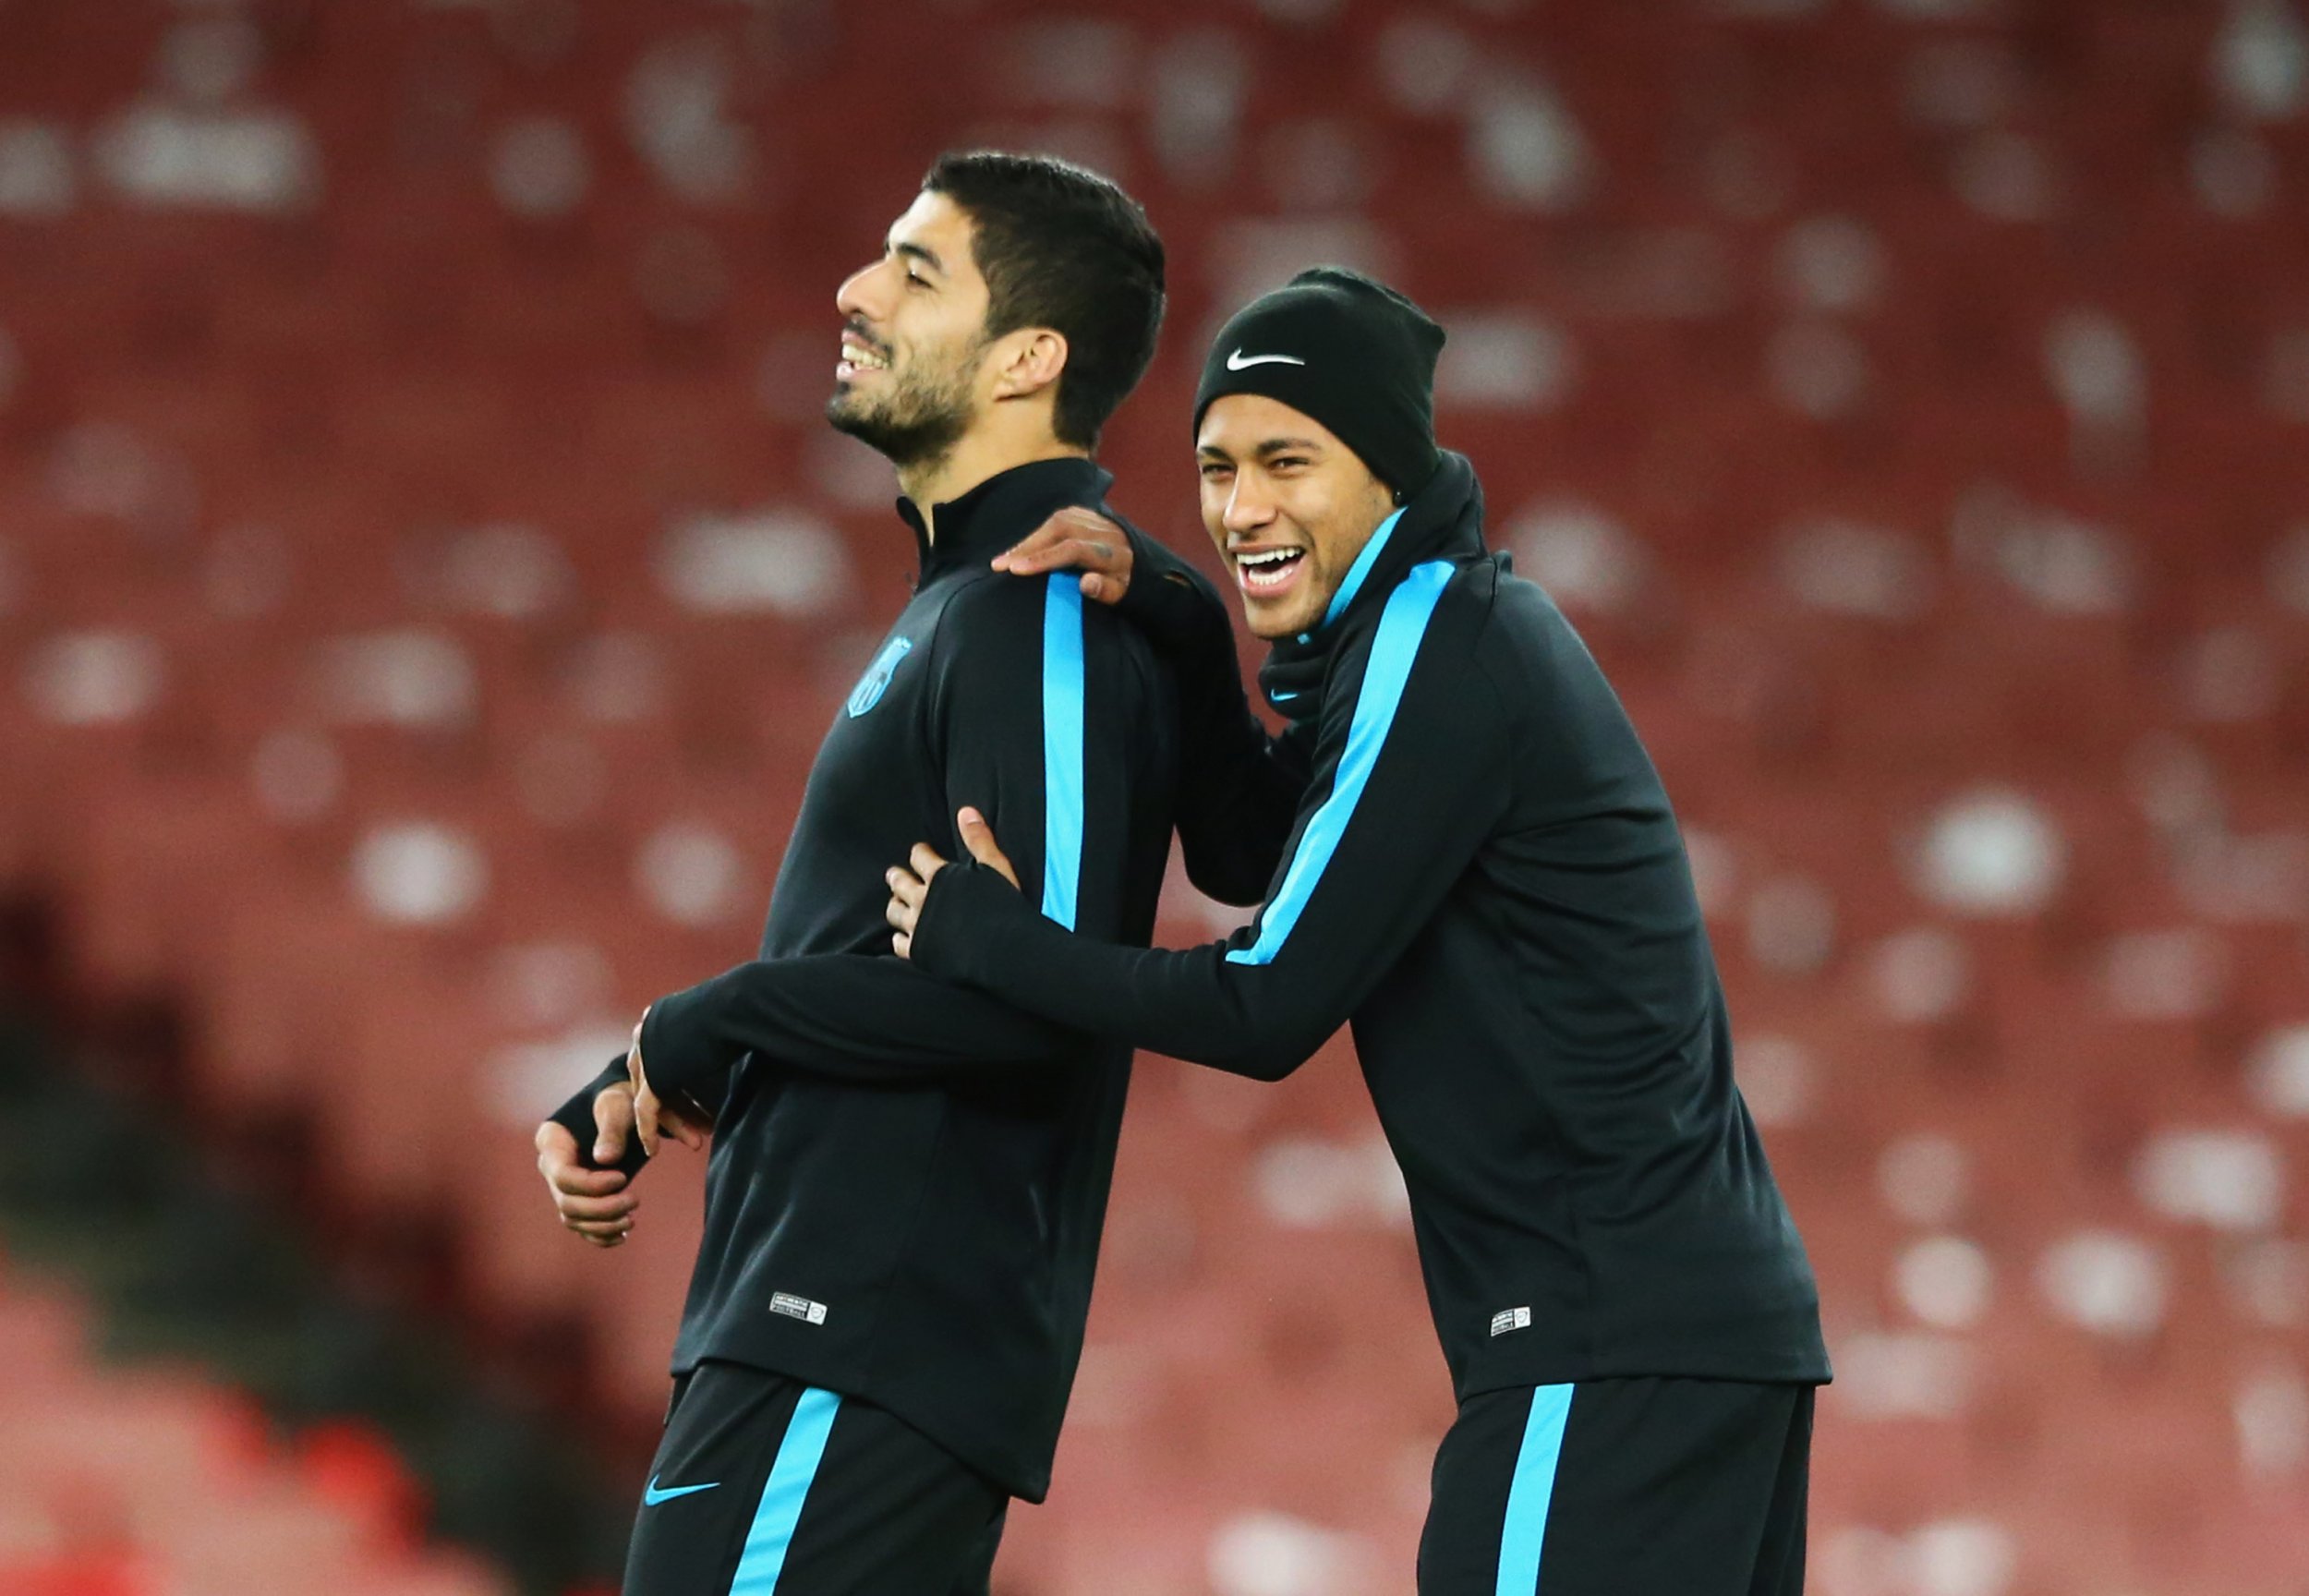 Luis Suarez, right, and Nemyar in Barcelona training.